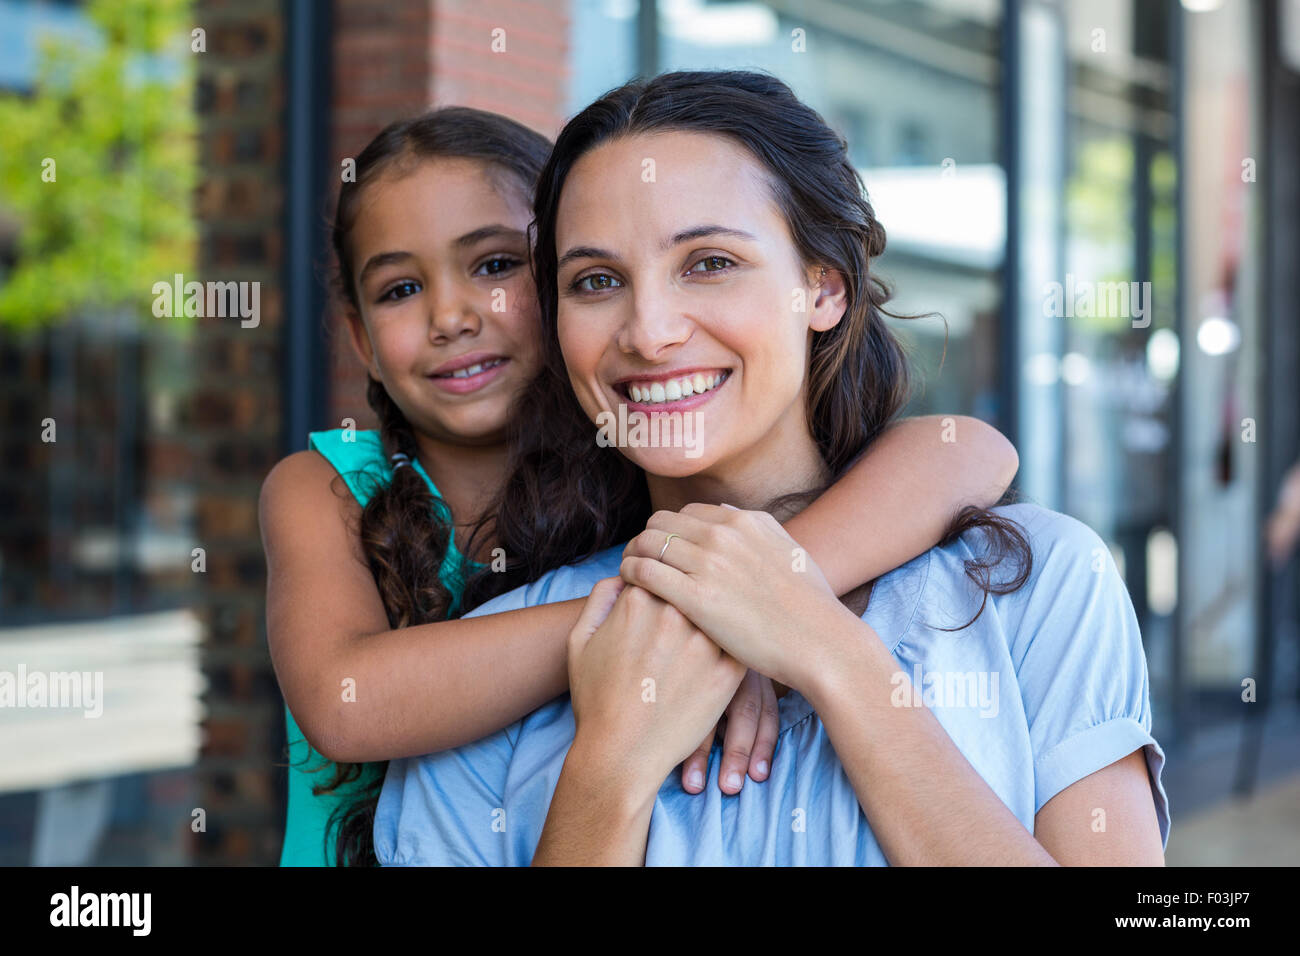 Portrait of a smiling mother and her daughter piggybacking Stock Photo